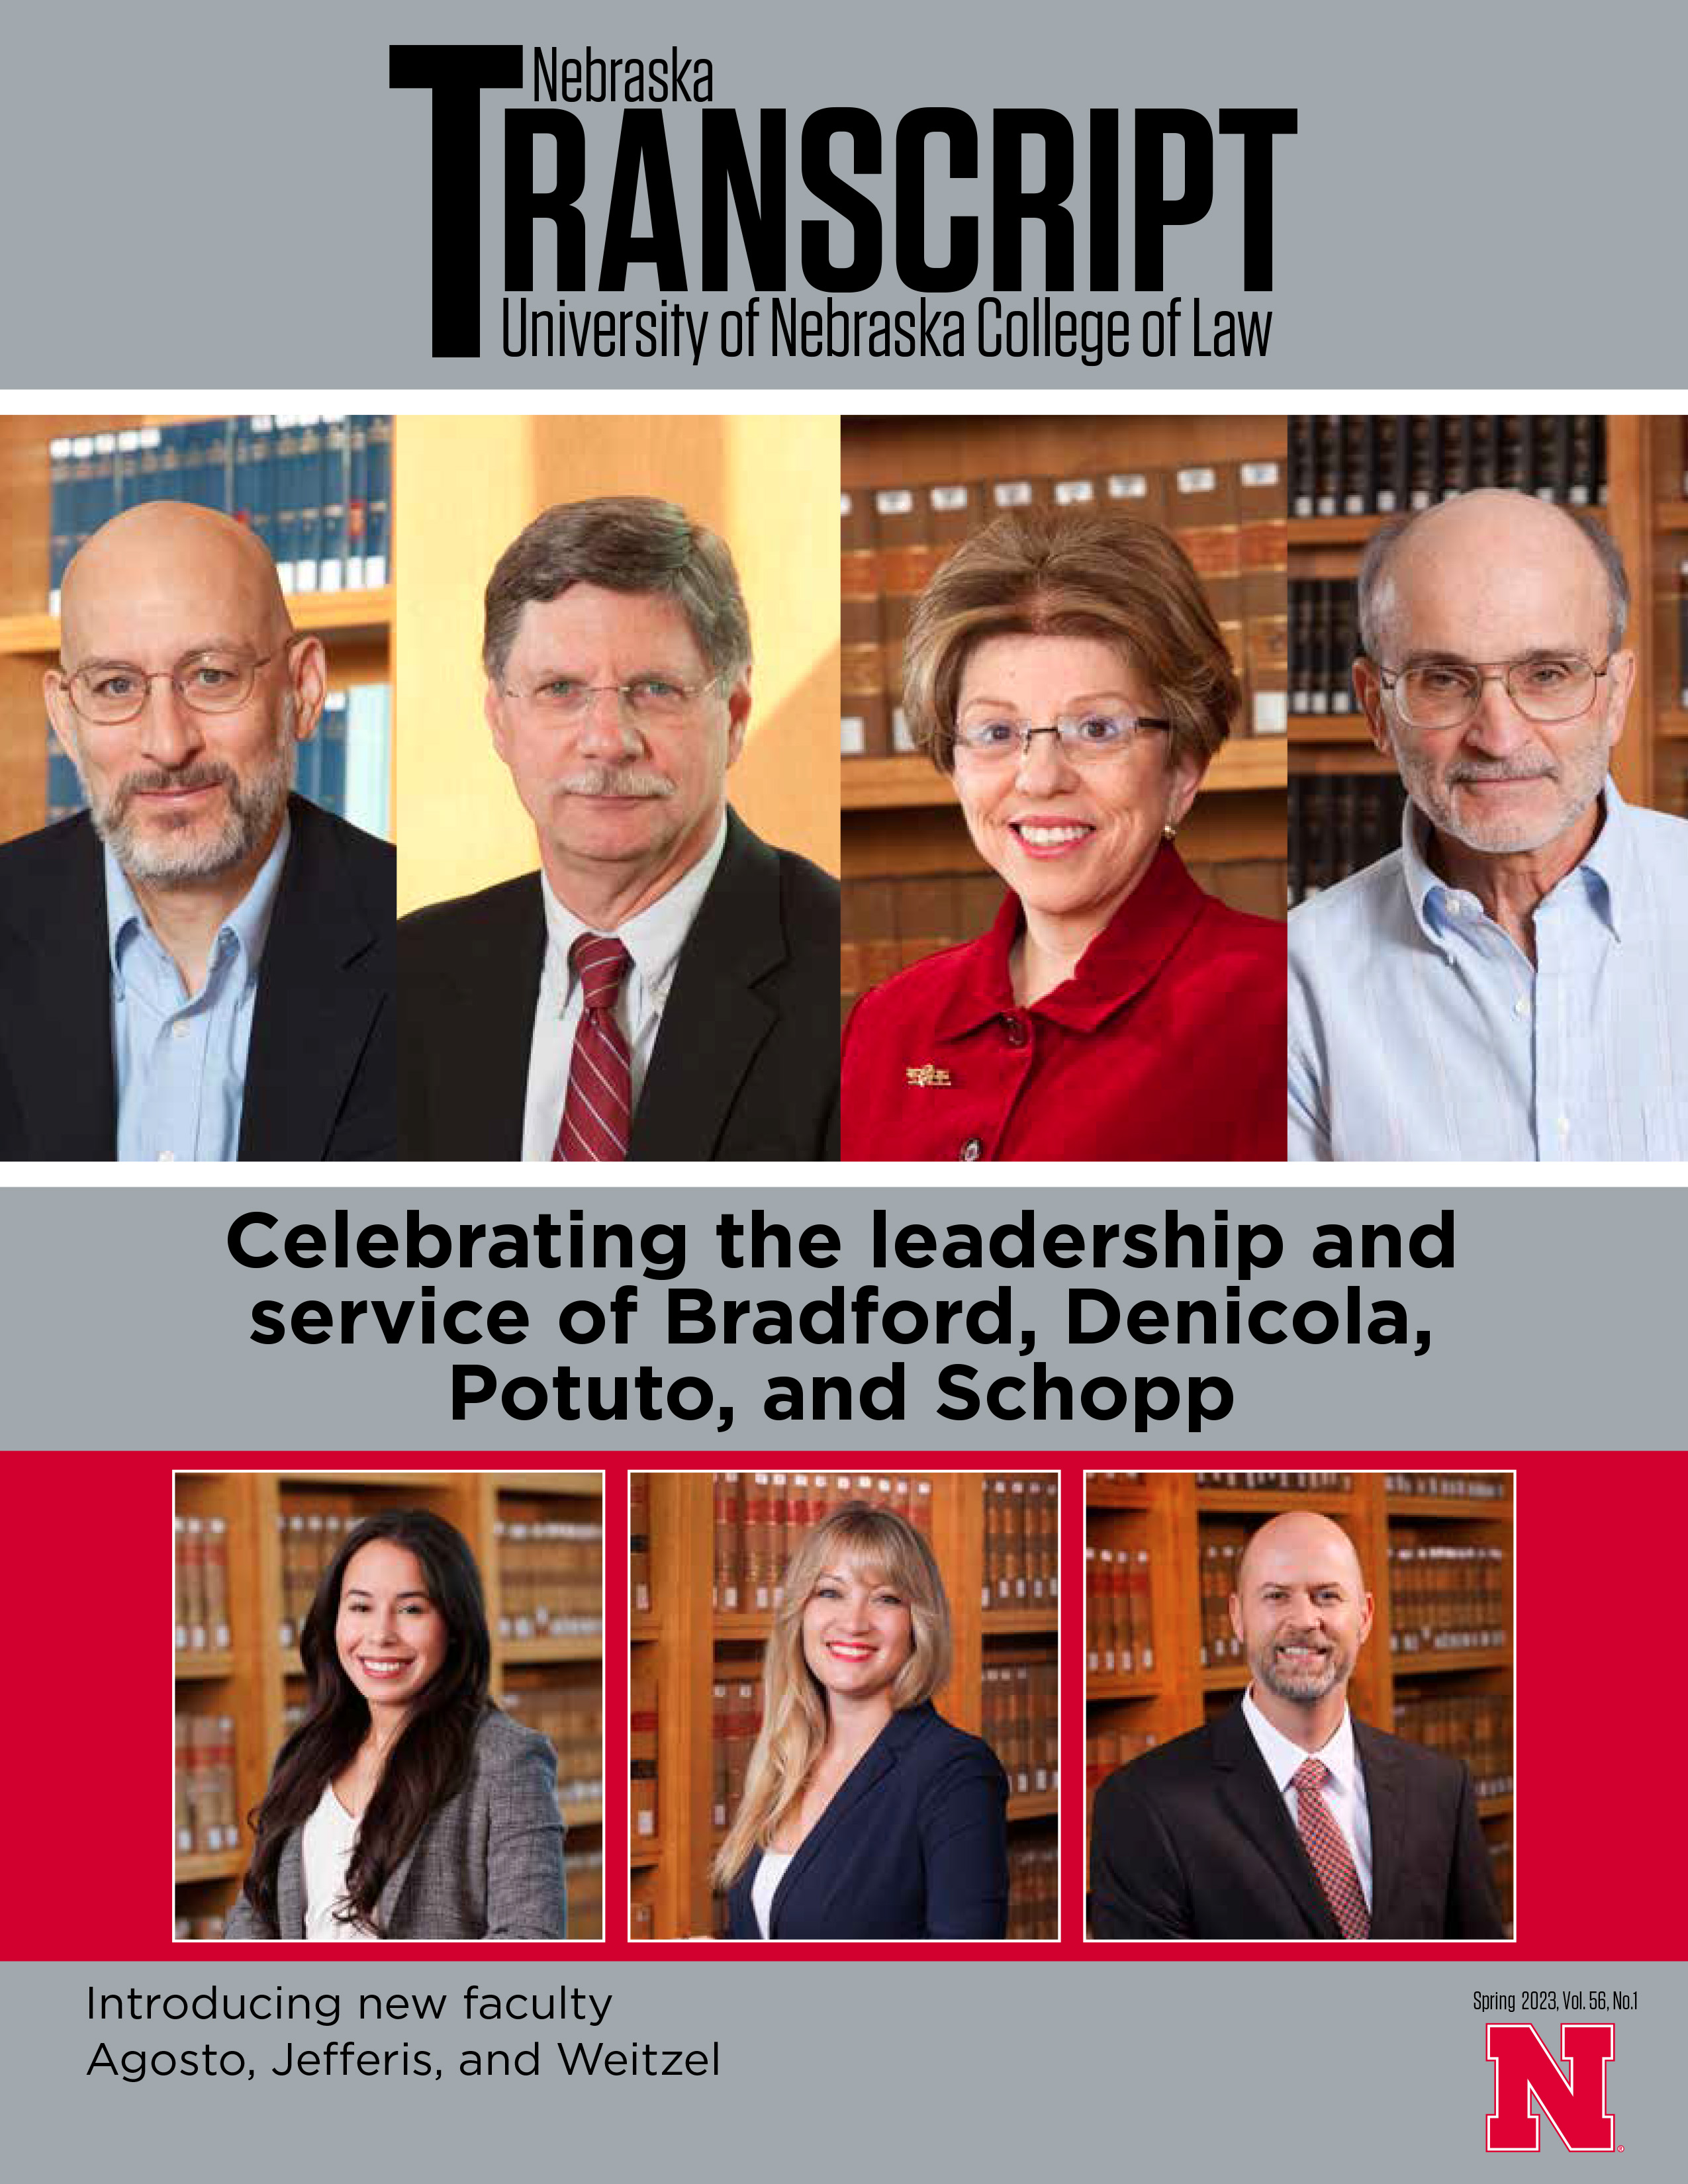 Magazine cover with headshot photos of seven professors